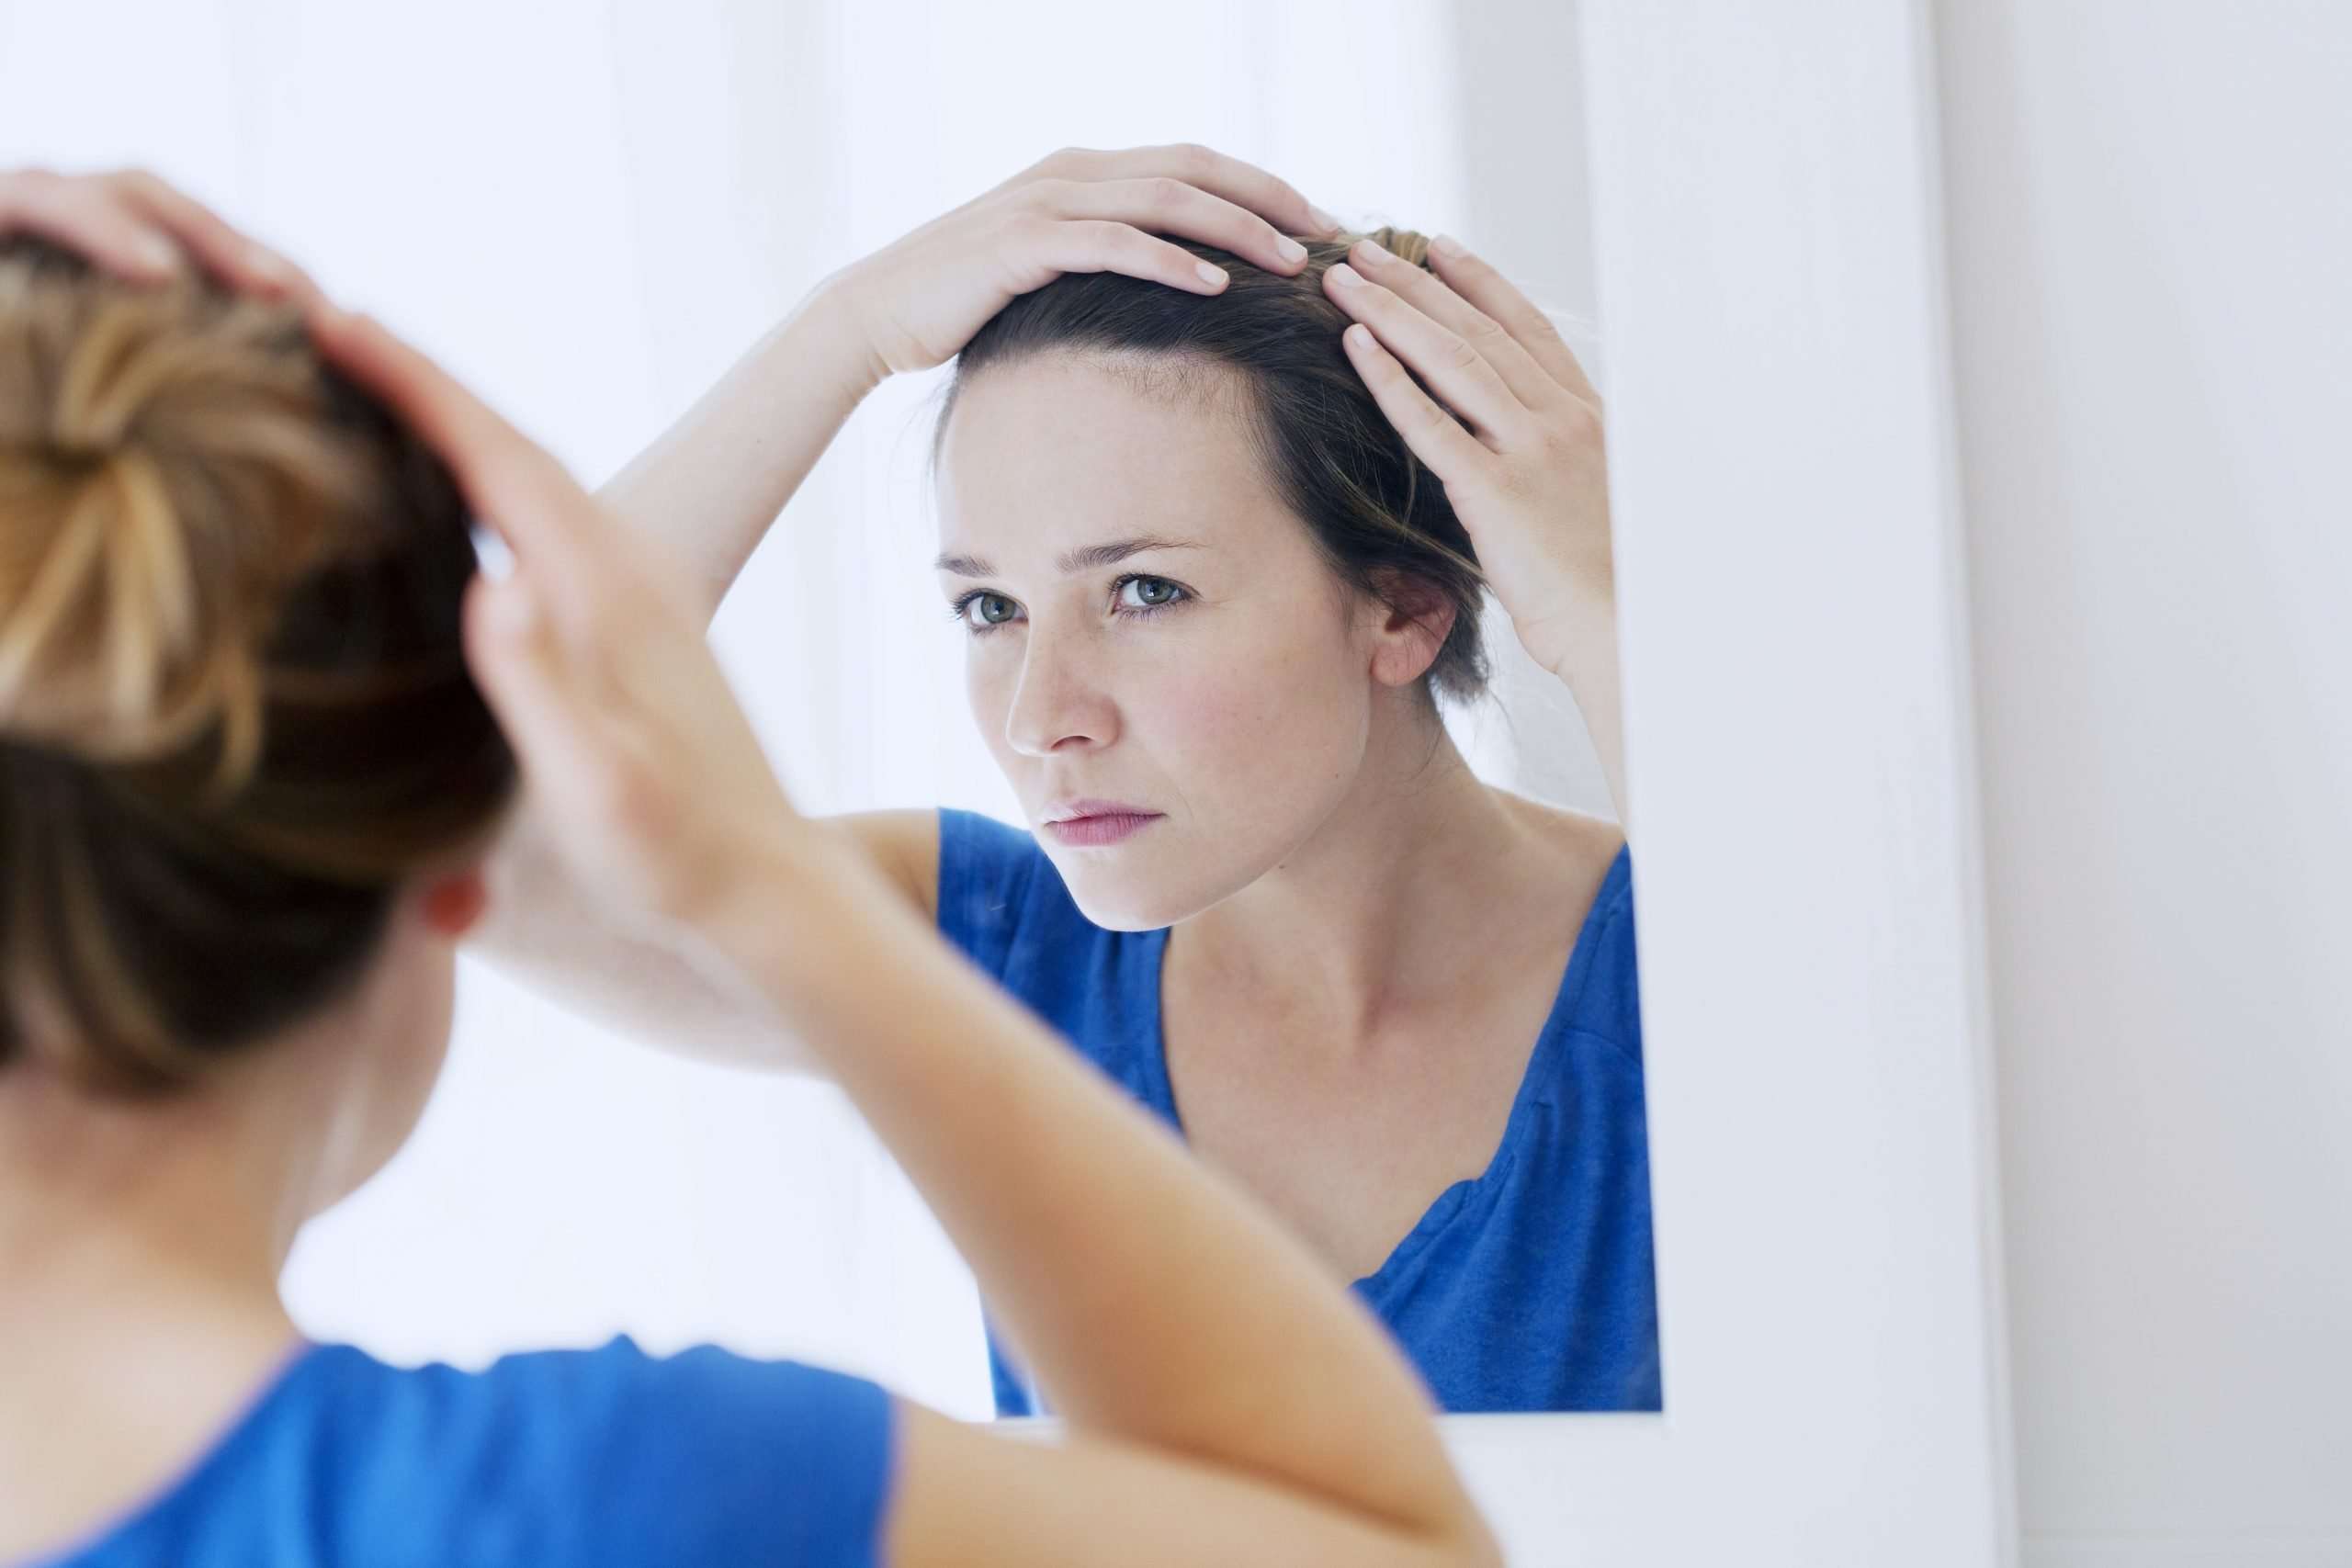 5 Reasons Why You Have an Itchy Scalp